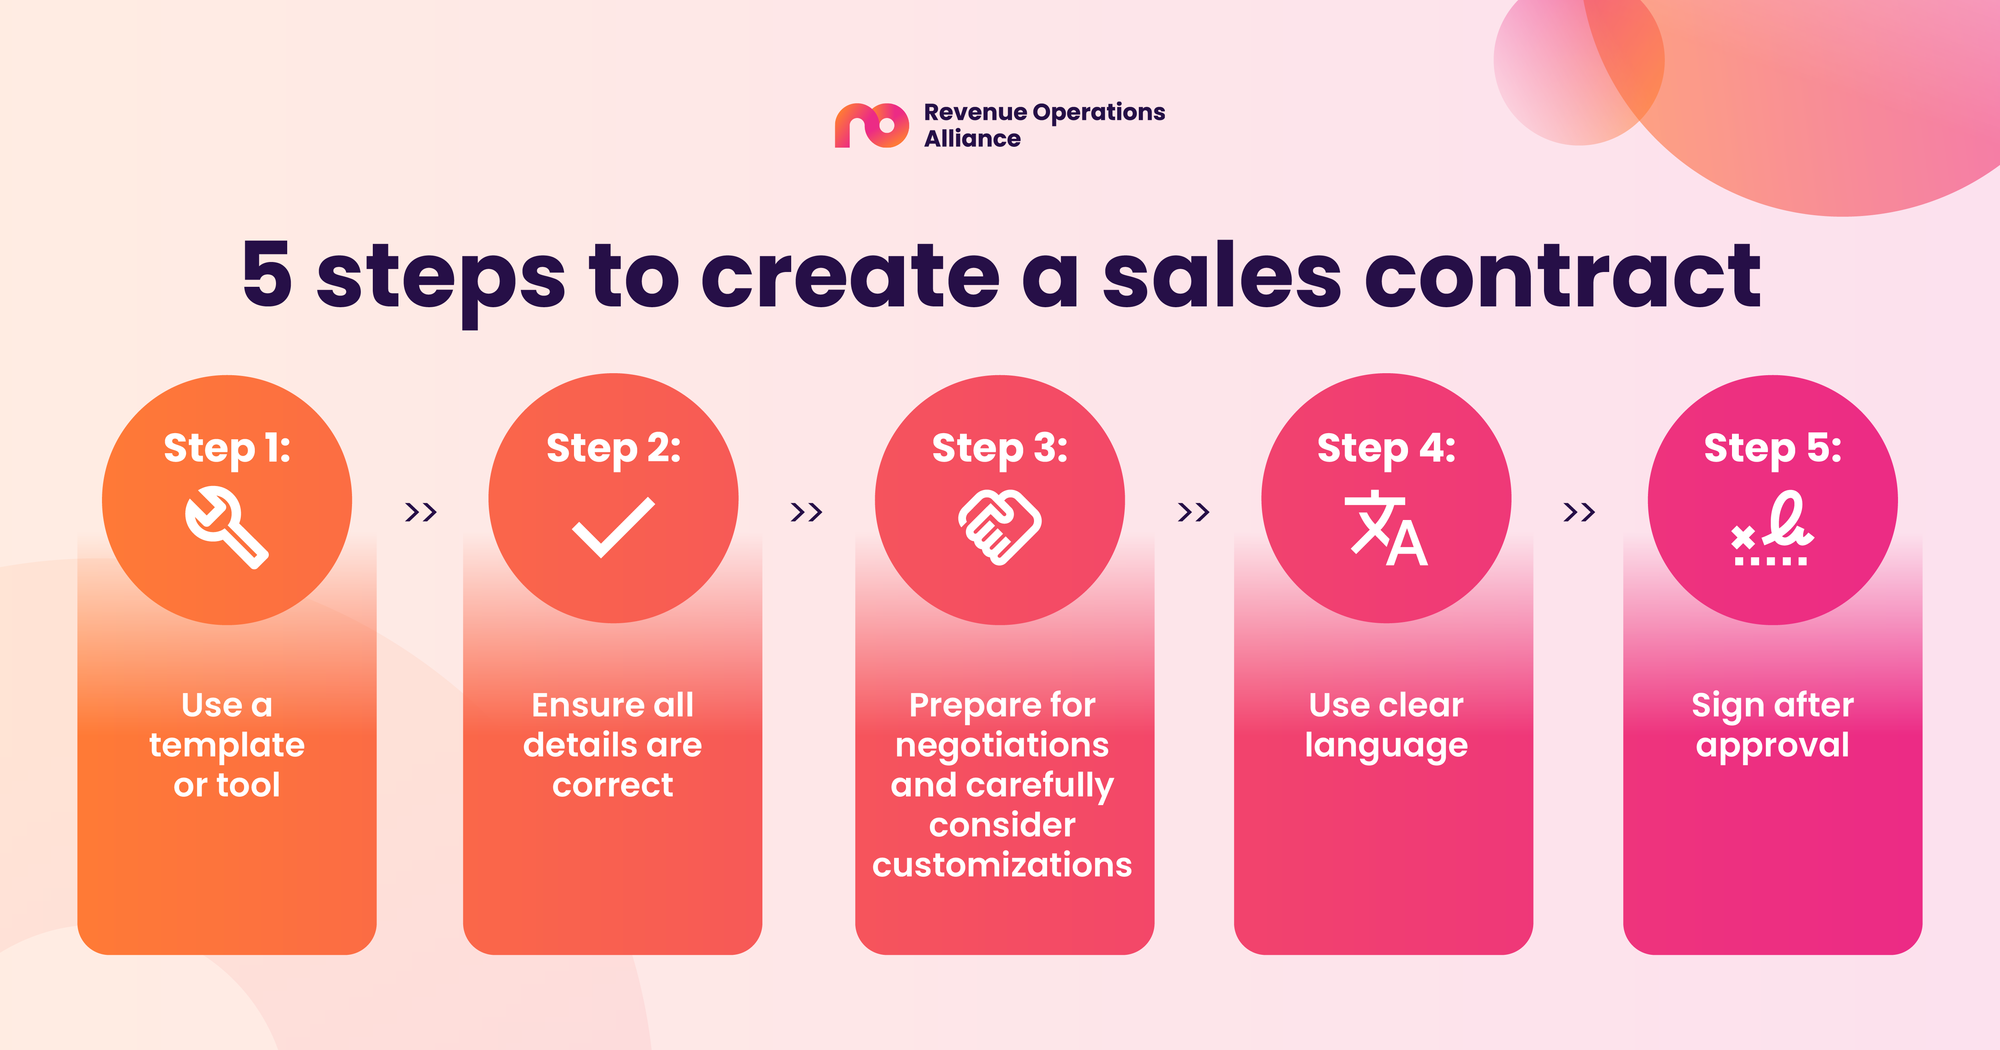 5 steps to create a sales contract  Step 1: Use a template or tool  Step 2: Ensure all details are correct Step 3: Prepare for negotiations and carefully consider customizations Step 4: Use clear language Step 5: Sign after approval